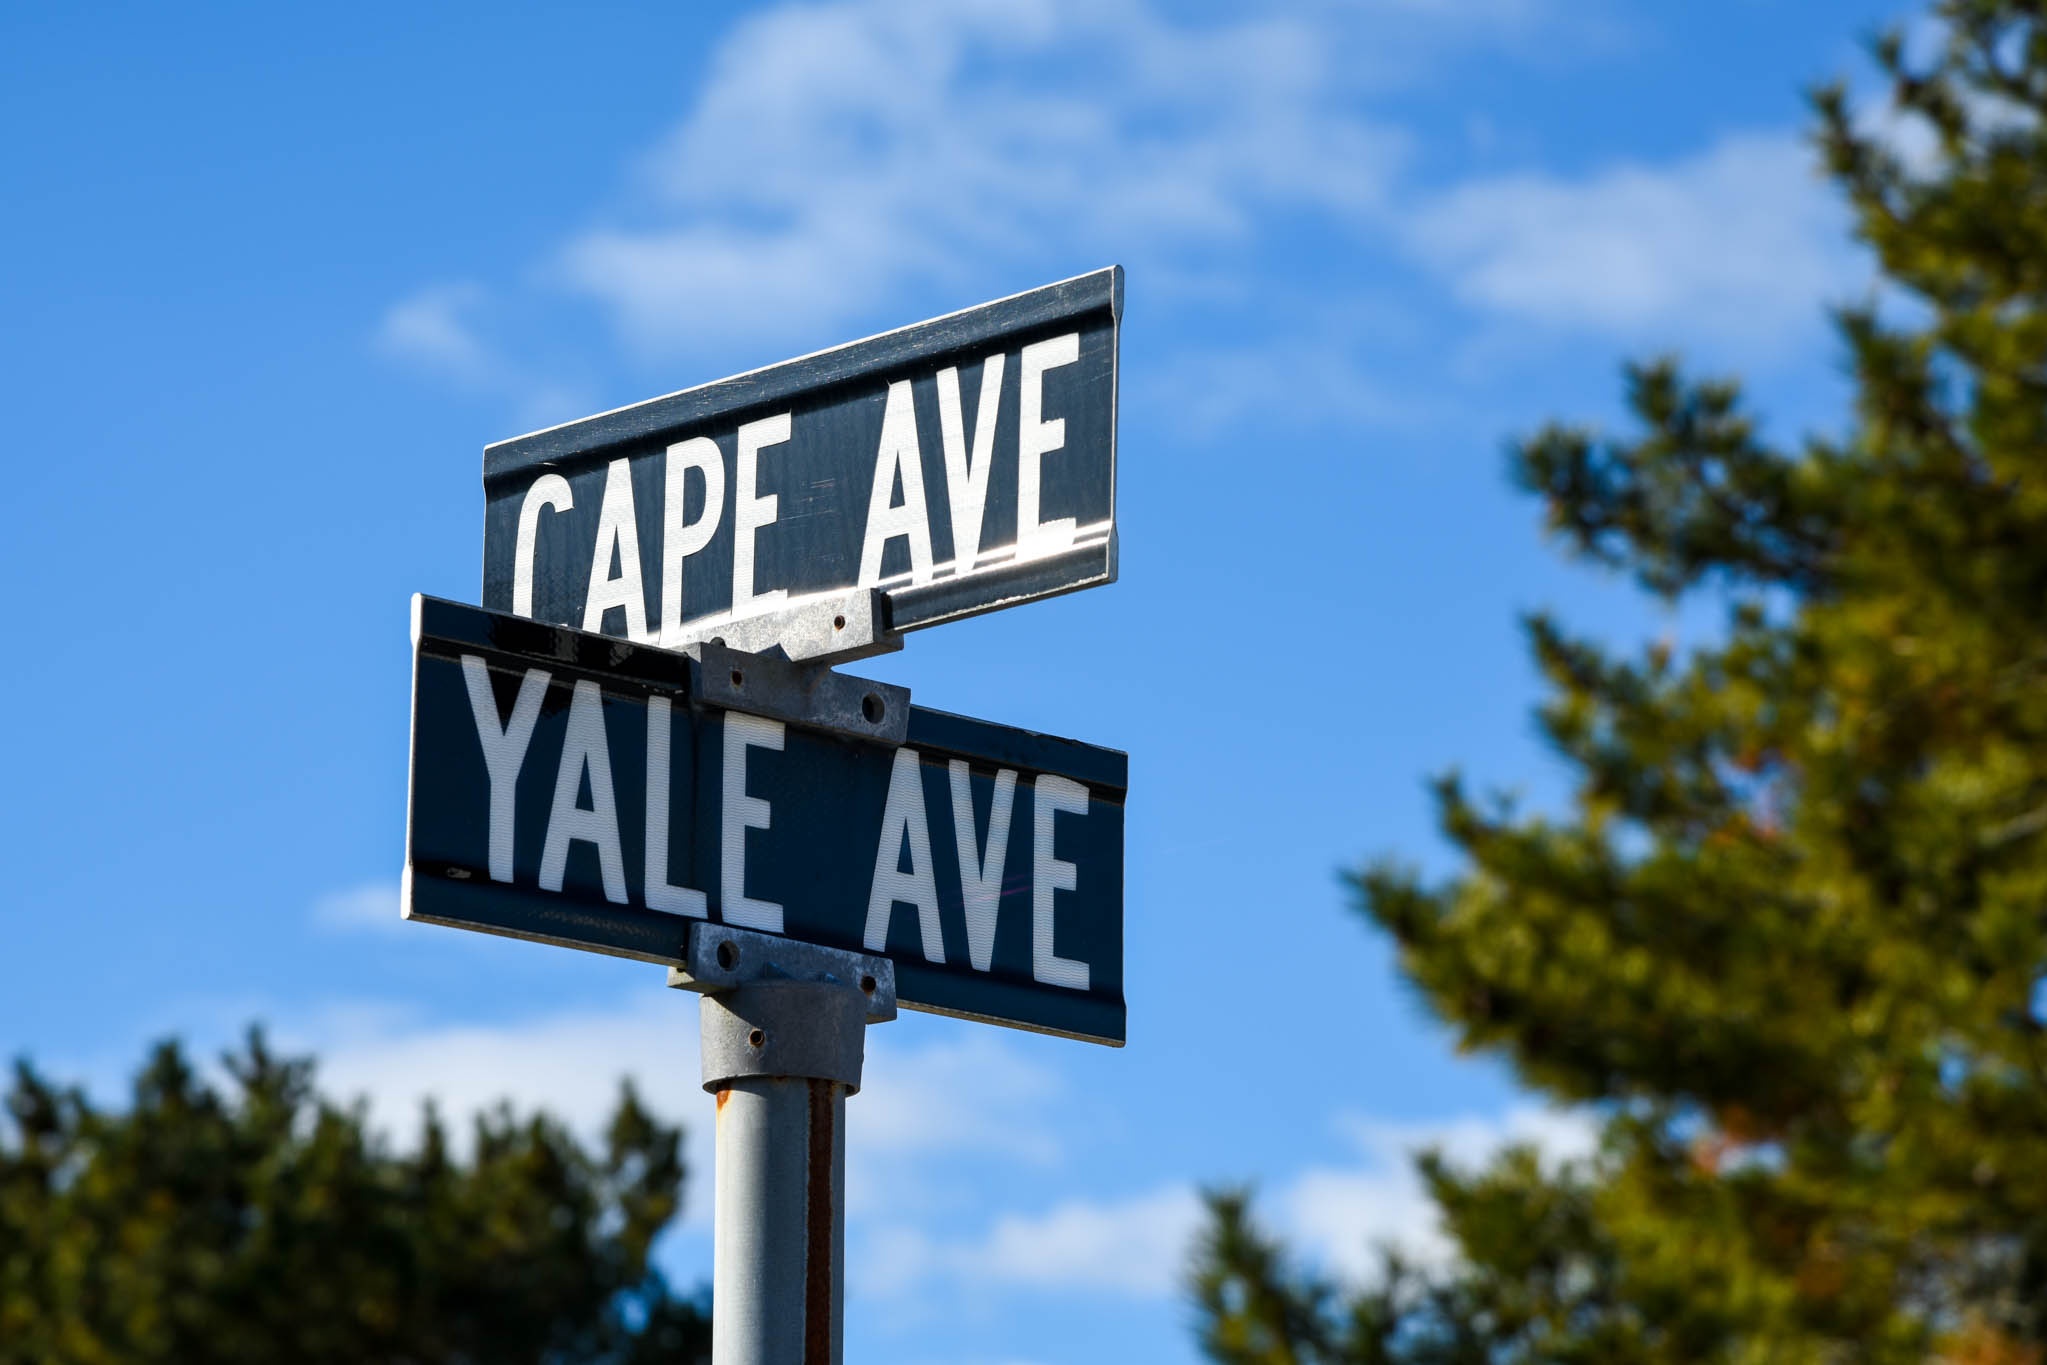 Cape May Point Street signs Cape Ave. & Yale Ave. 